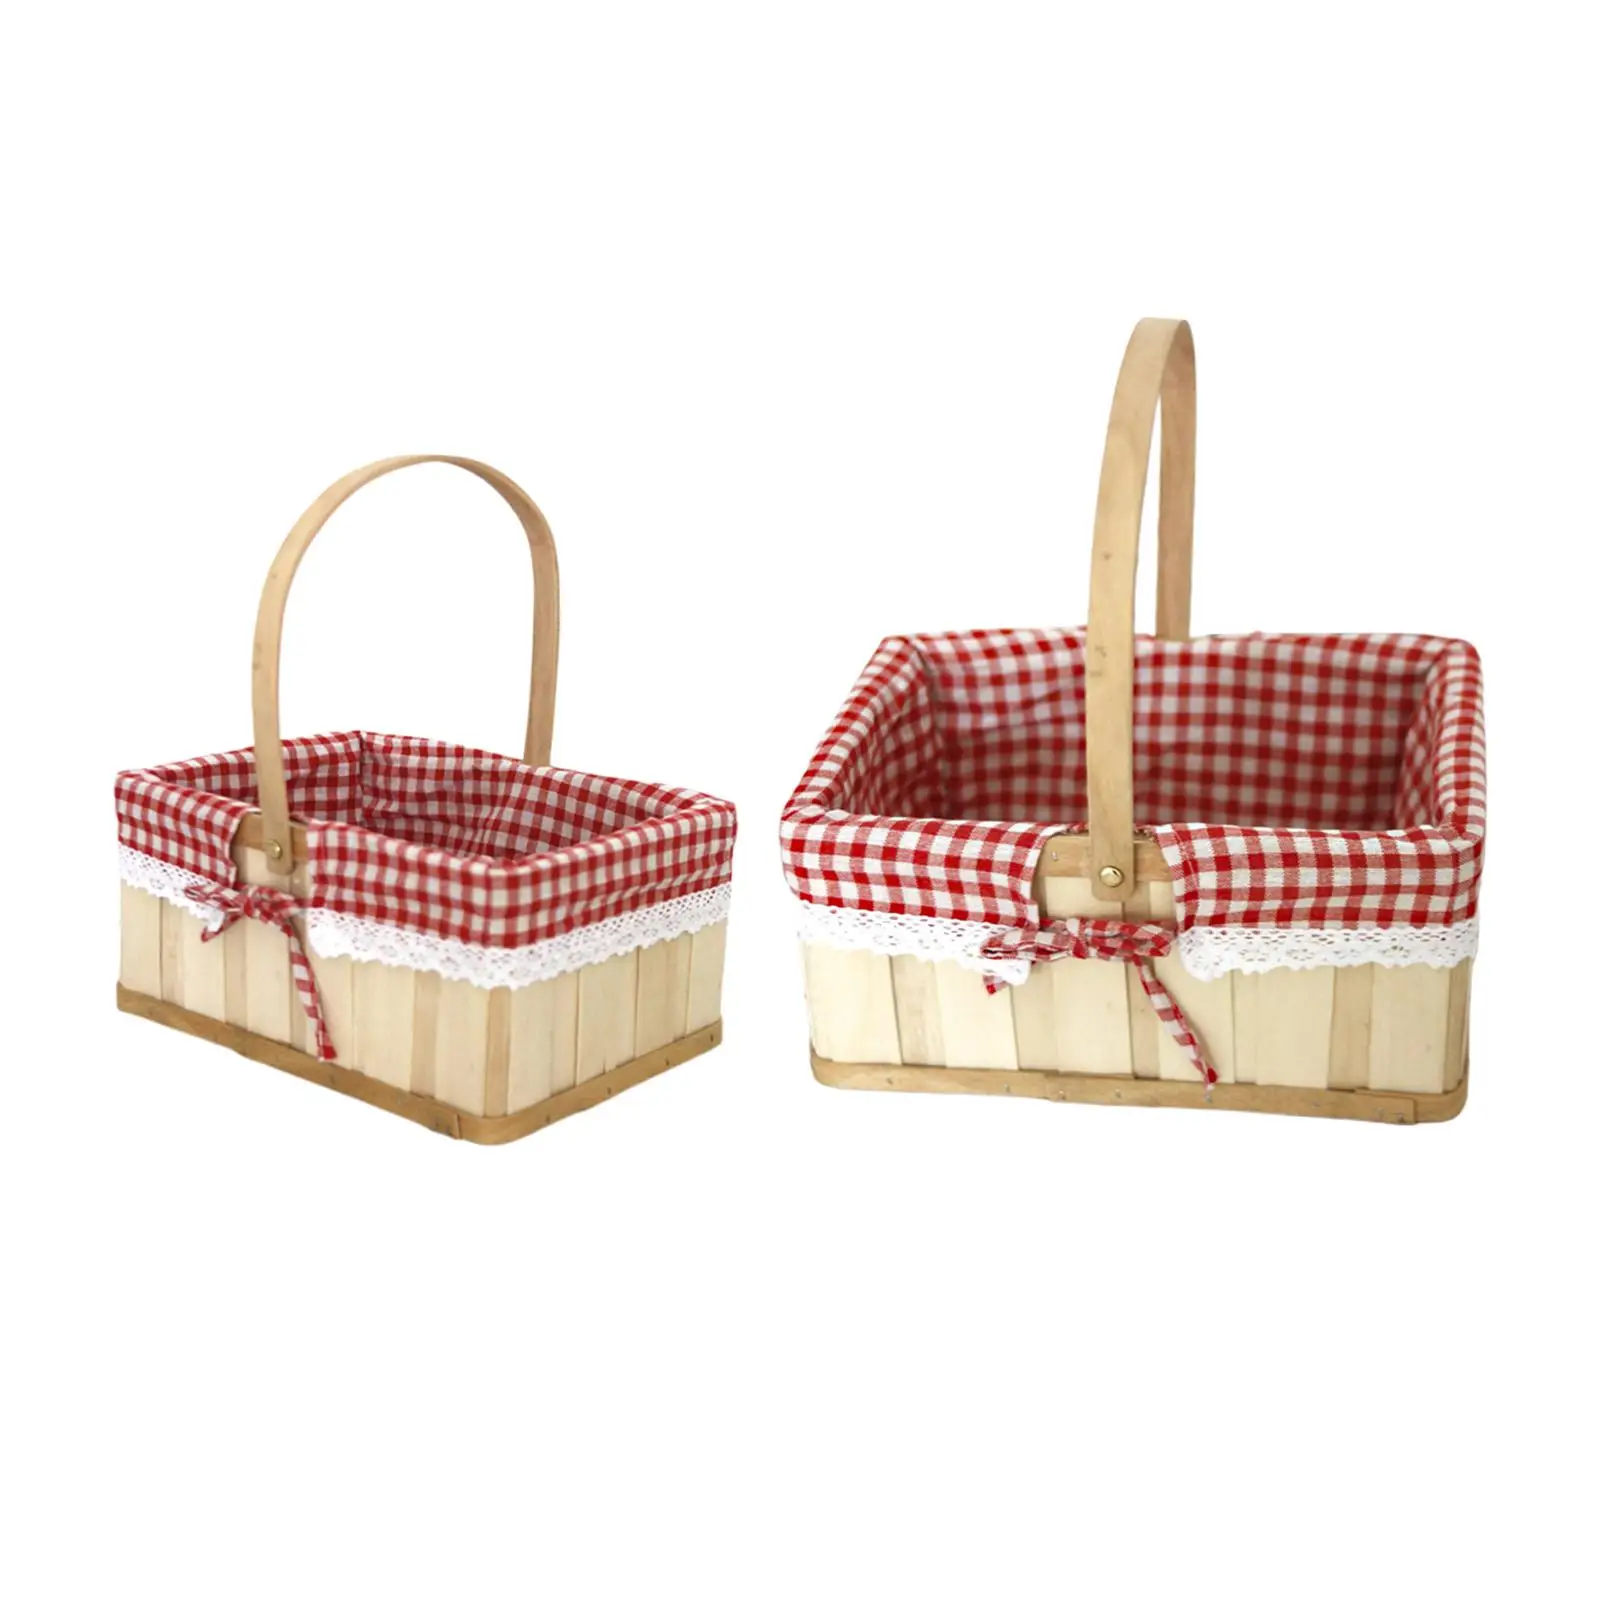 Wooden Food Sundry Container Picture Decor Woven Basket Camping Storage Baskets Picnic Basket for Camping Fruits Bread